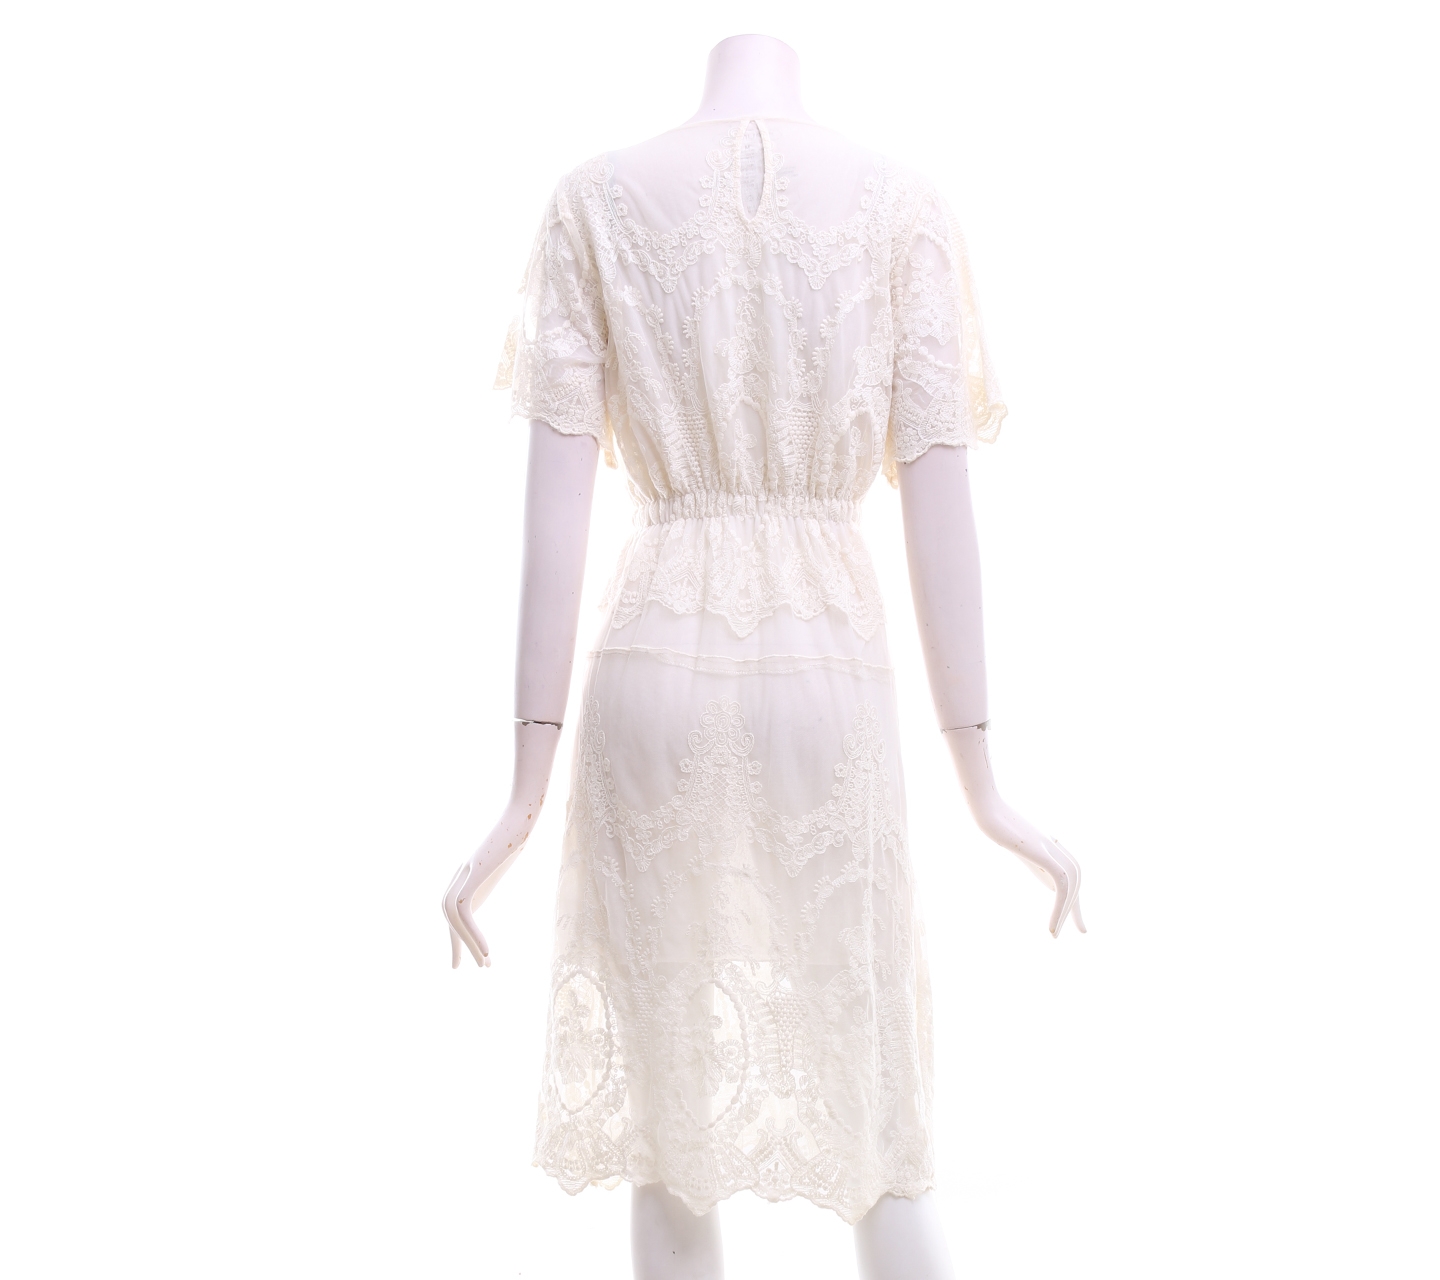 Maurices Patterned Lace Cream Mini Dress